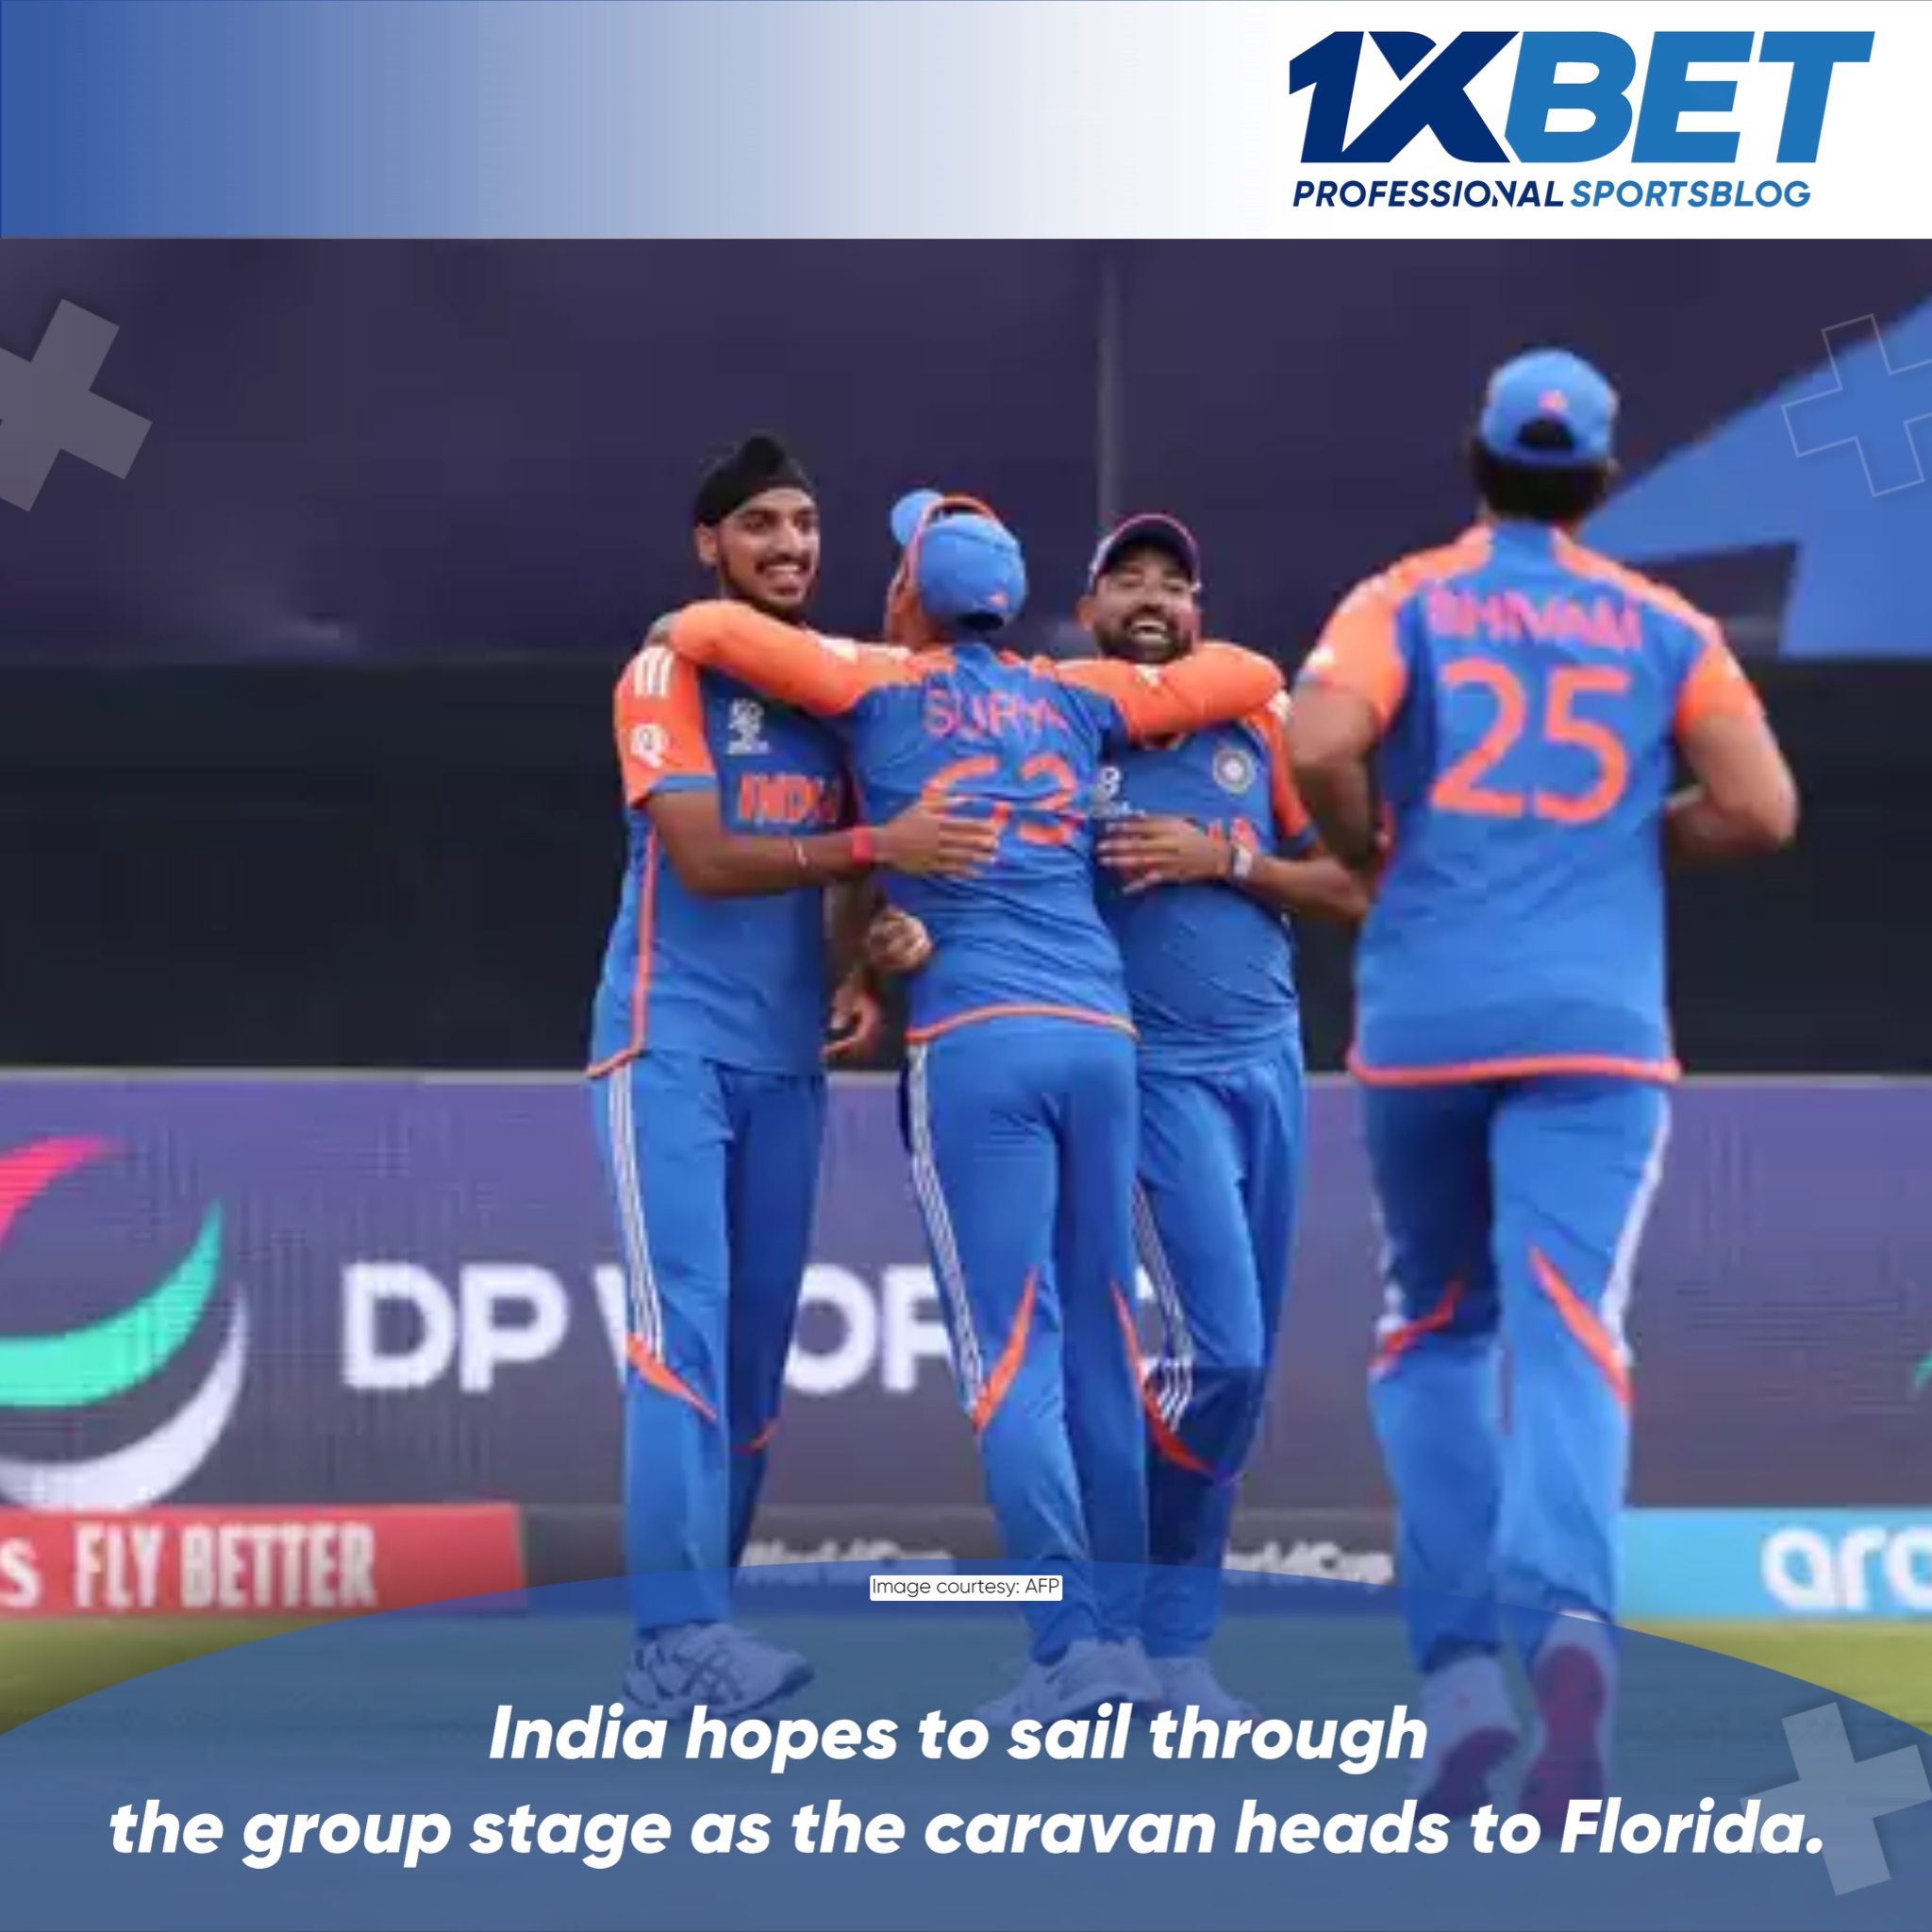 Preparations and Challenges Ahead for Indian Cricket Team in Florida